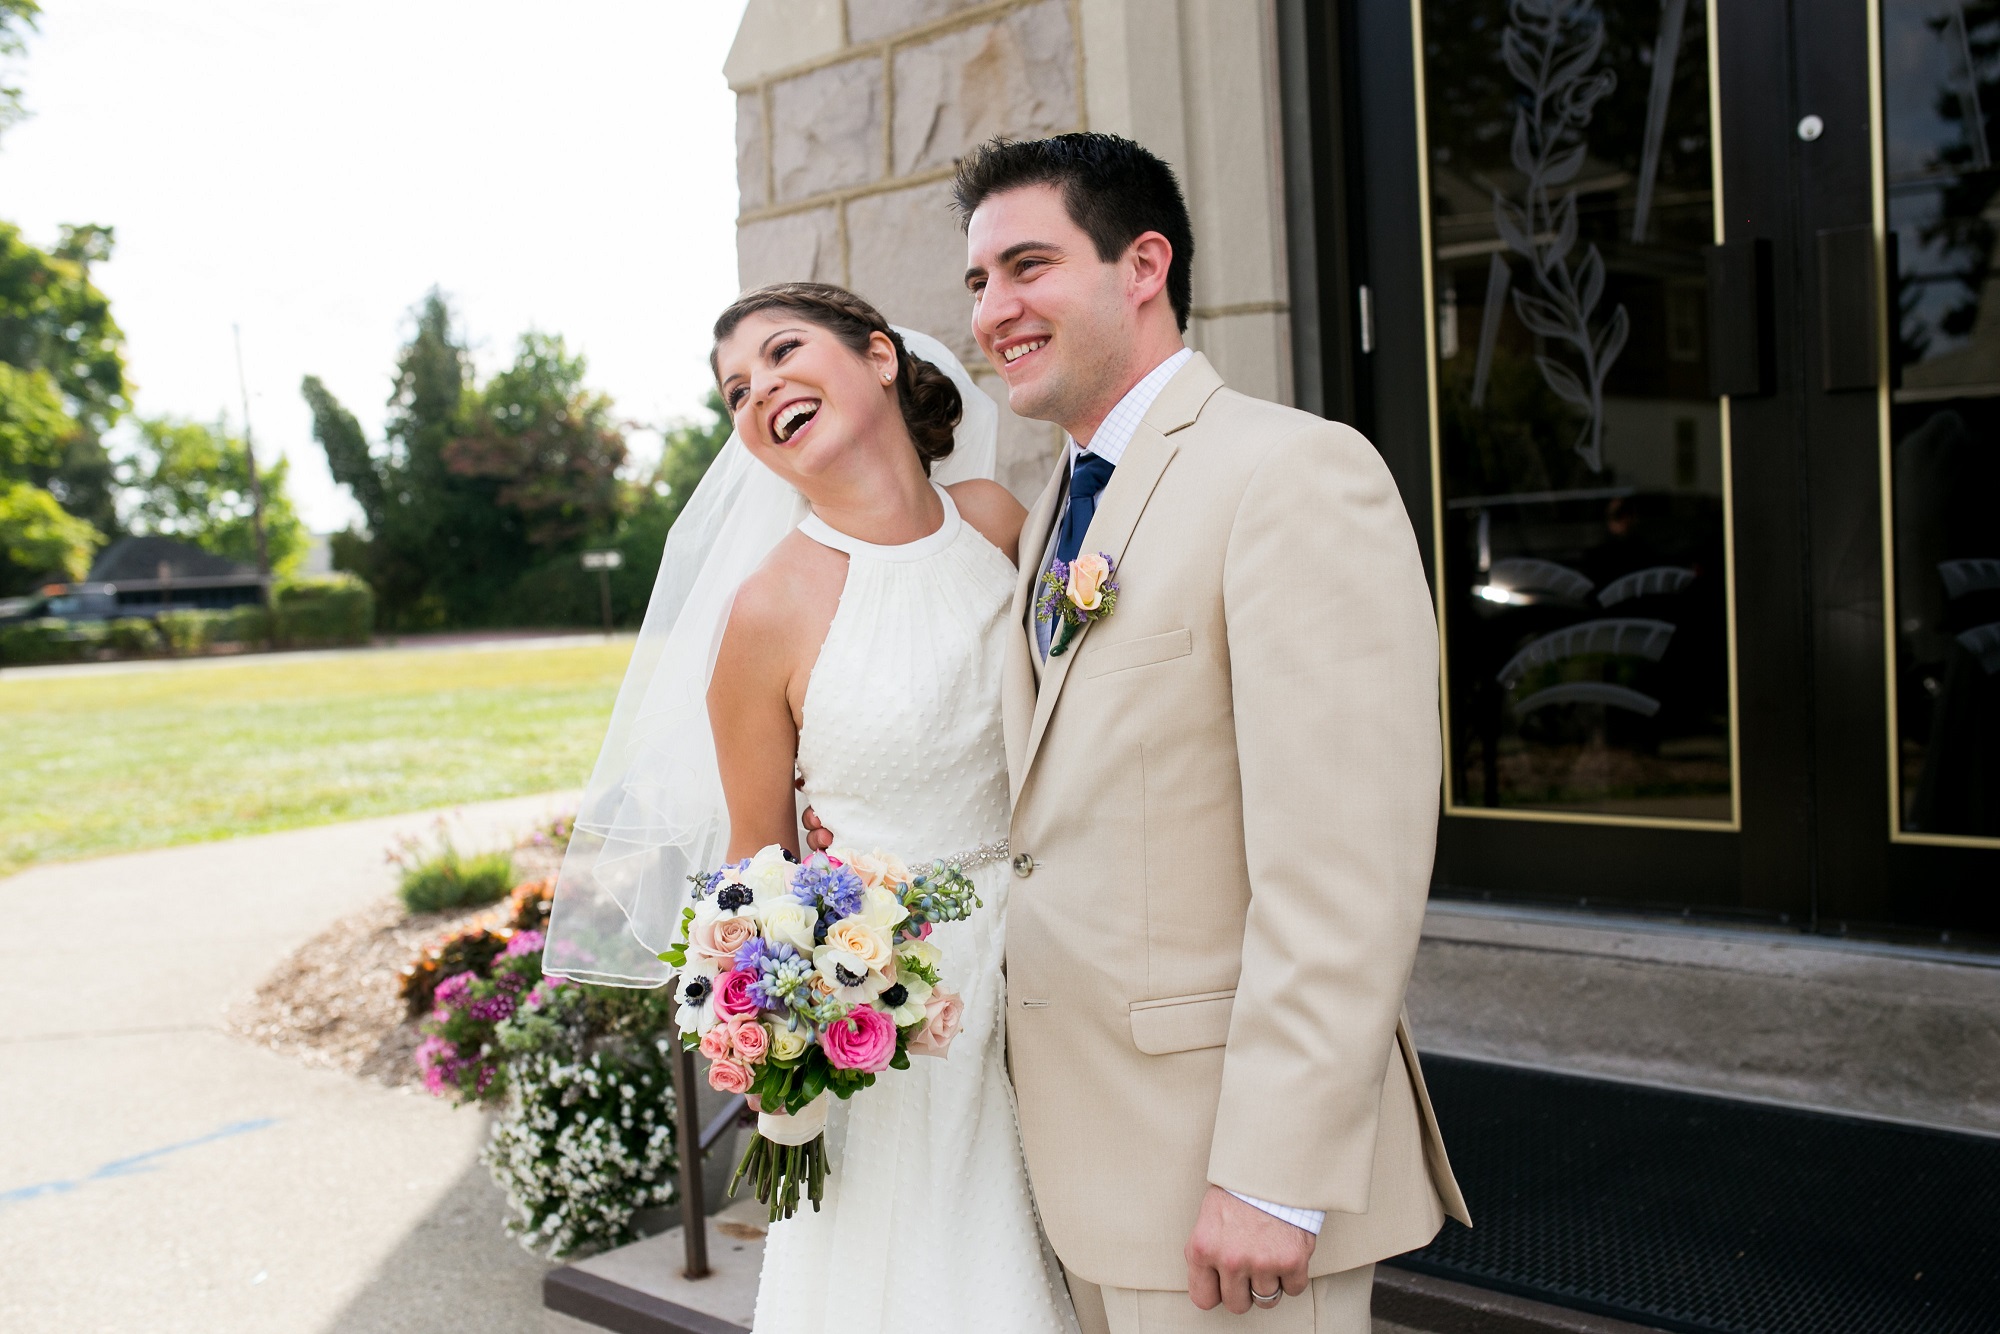 Bride and groom laughing outside church